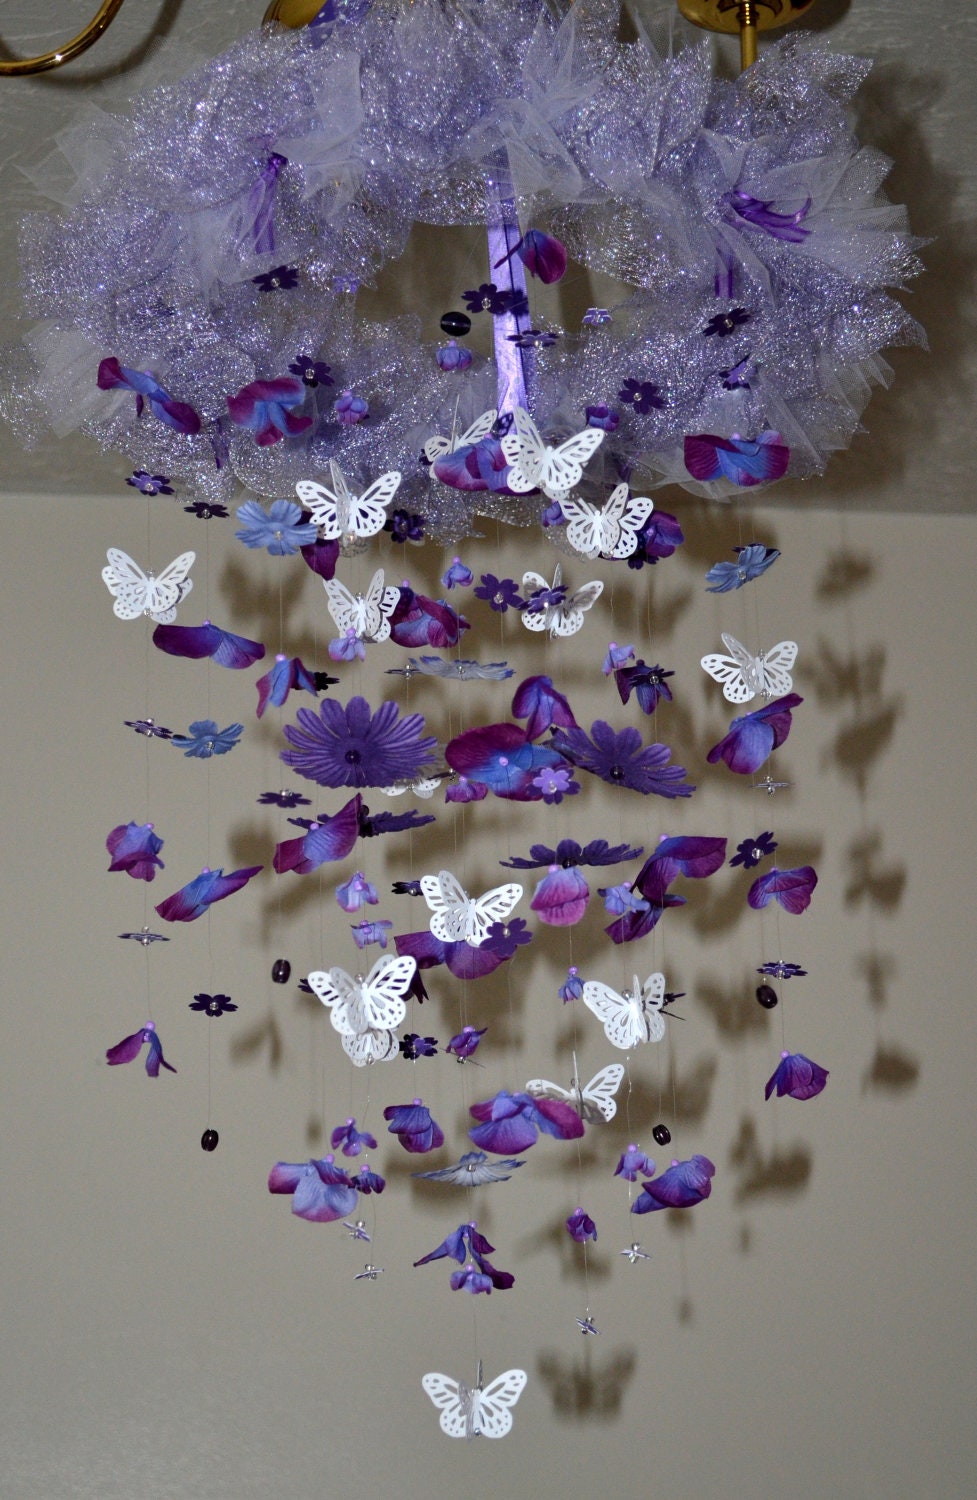 Lavender Dreams (Purple Butterfly mobile), Nursery Decor, Baby Shower Gift READY TO SHIP